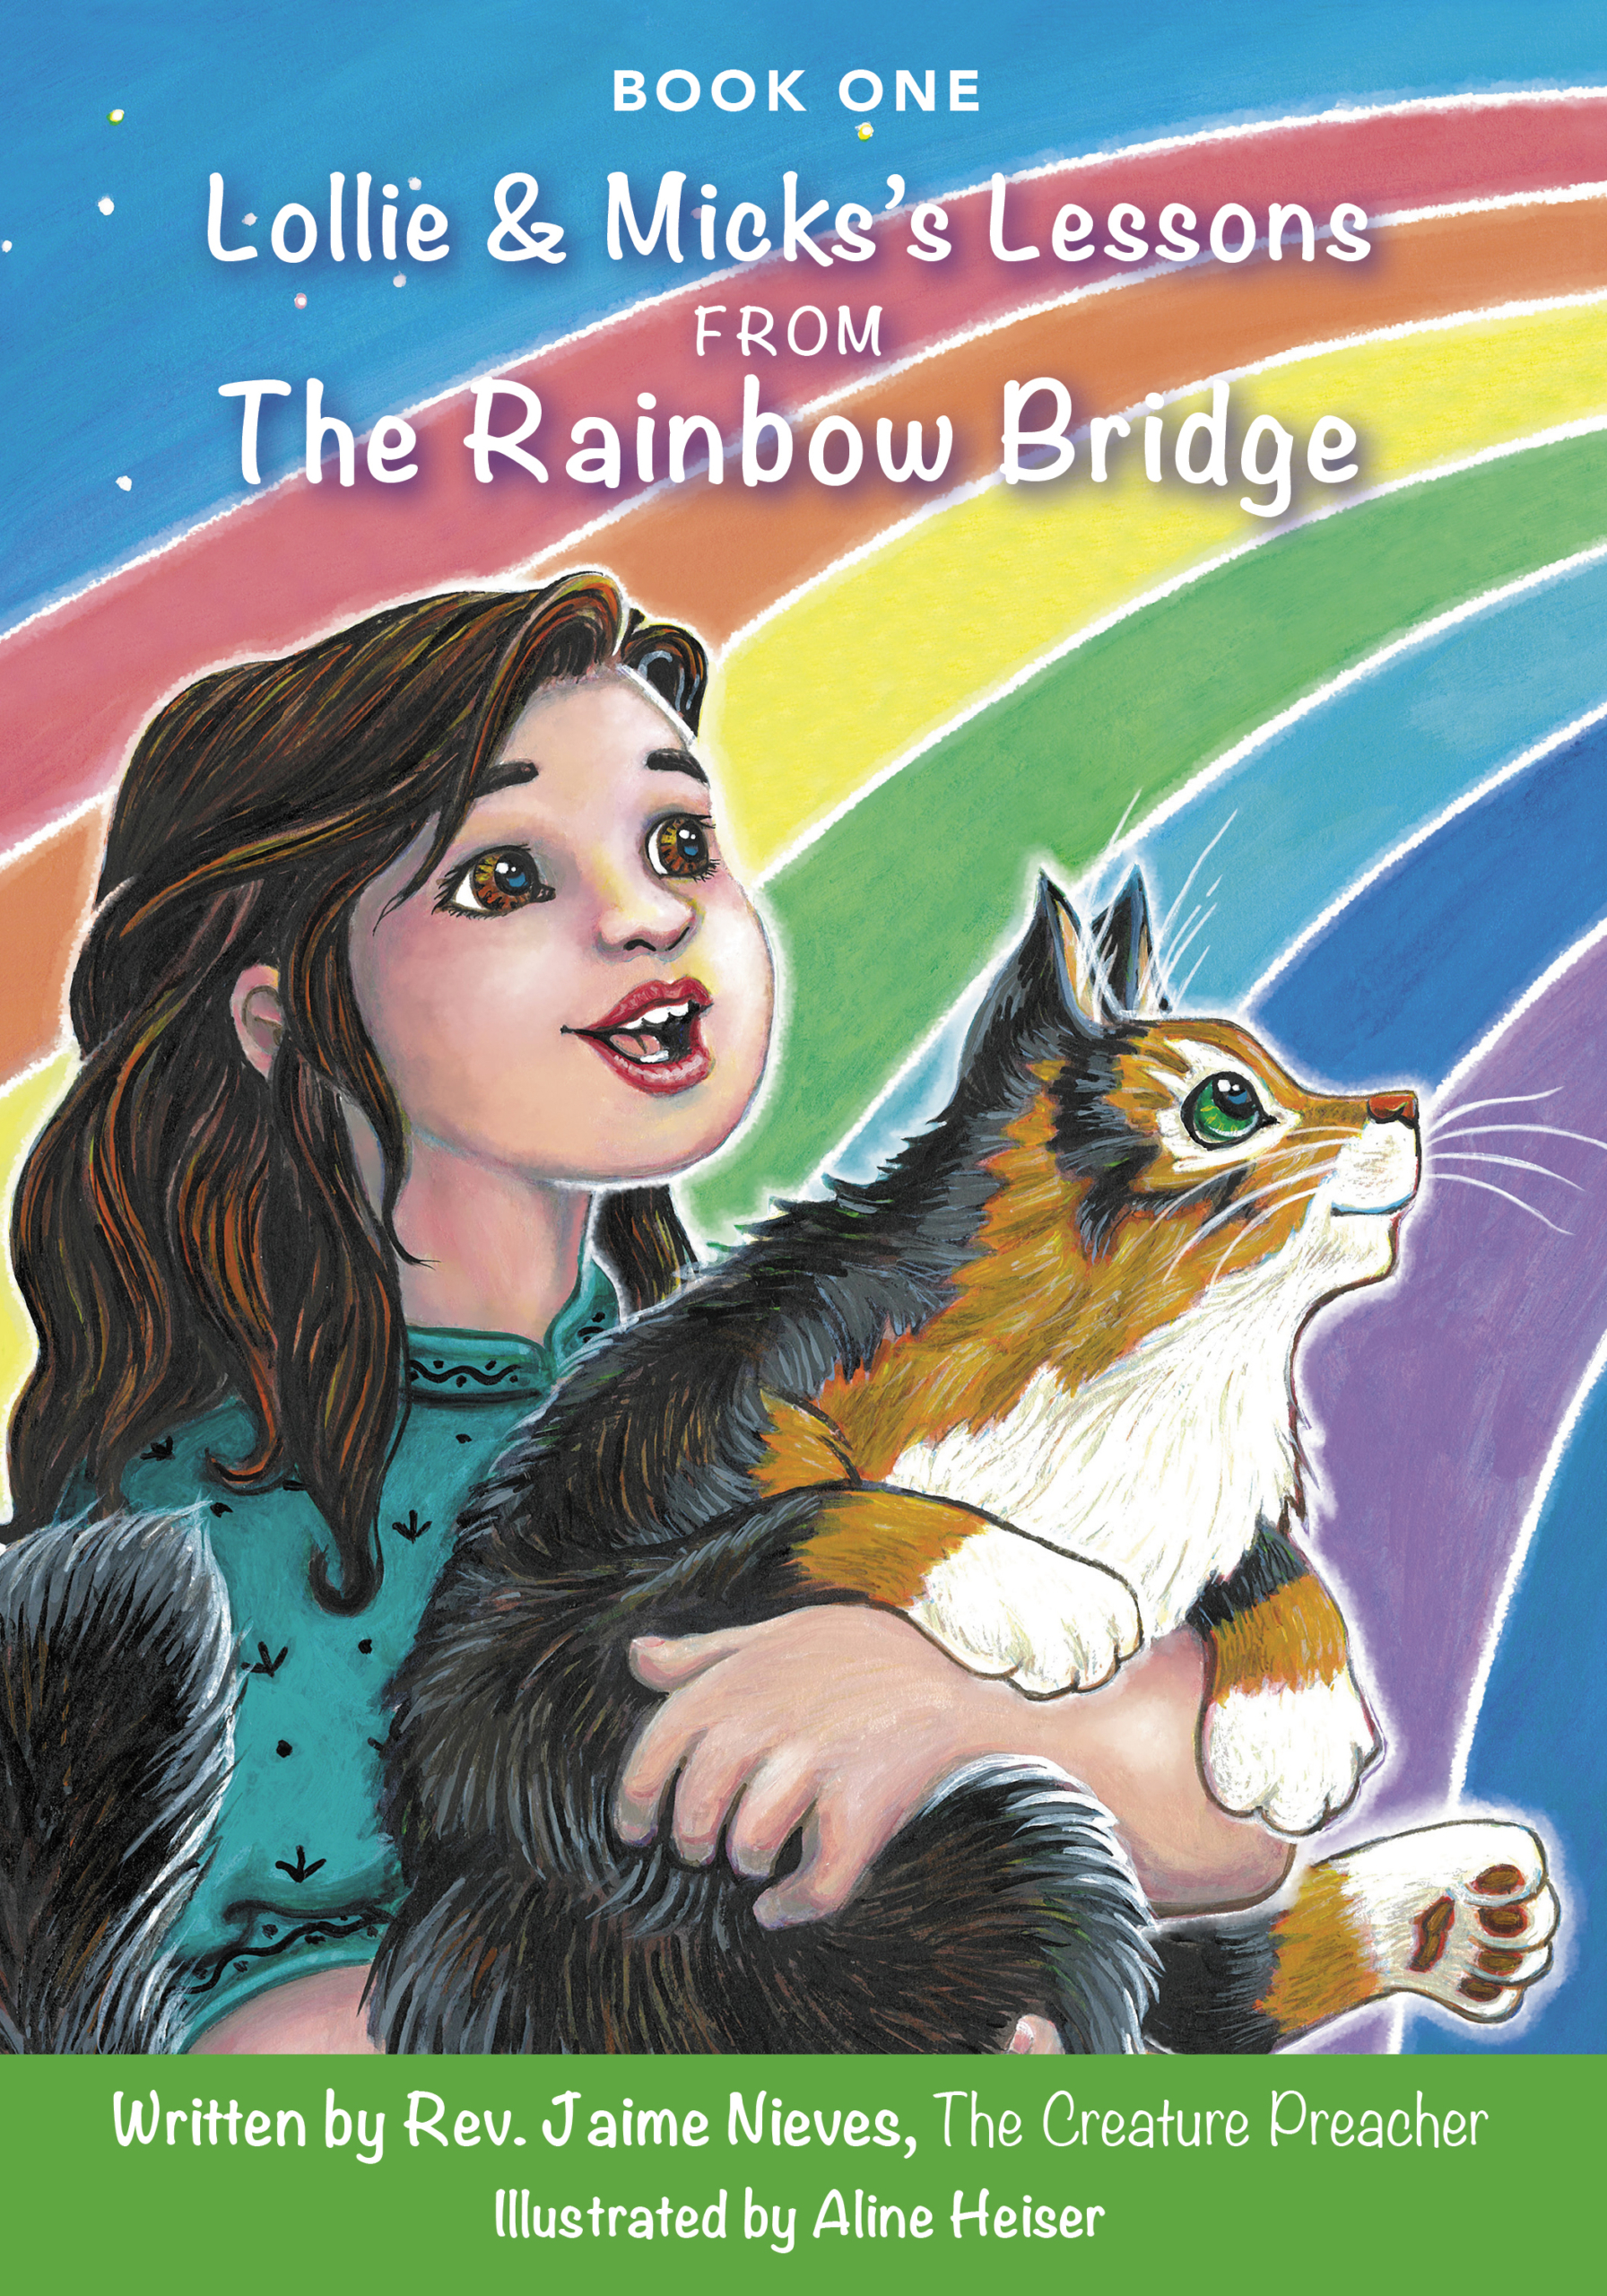 Lollie & Micks's Lessons from The Rainbow Bridge